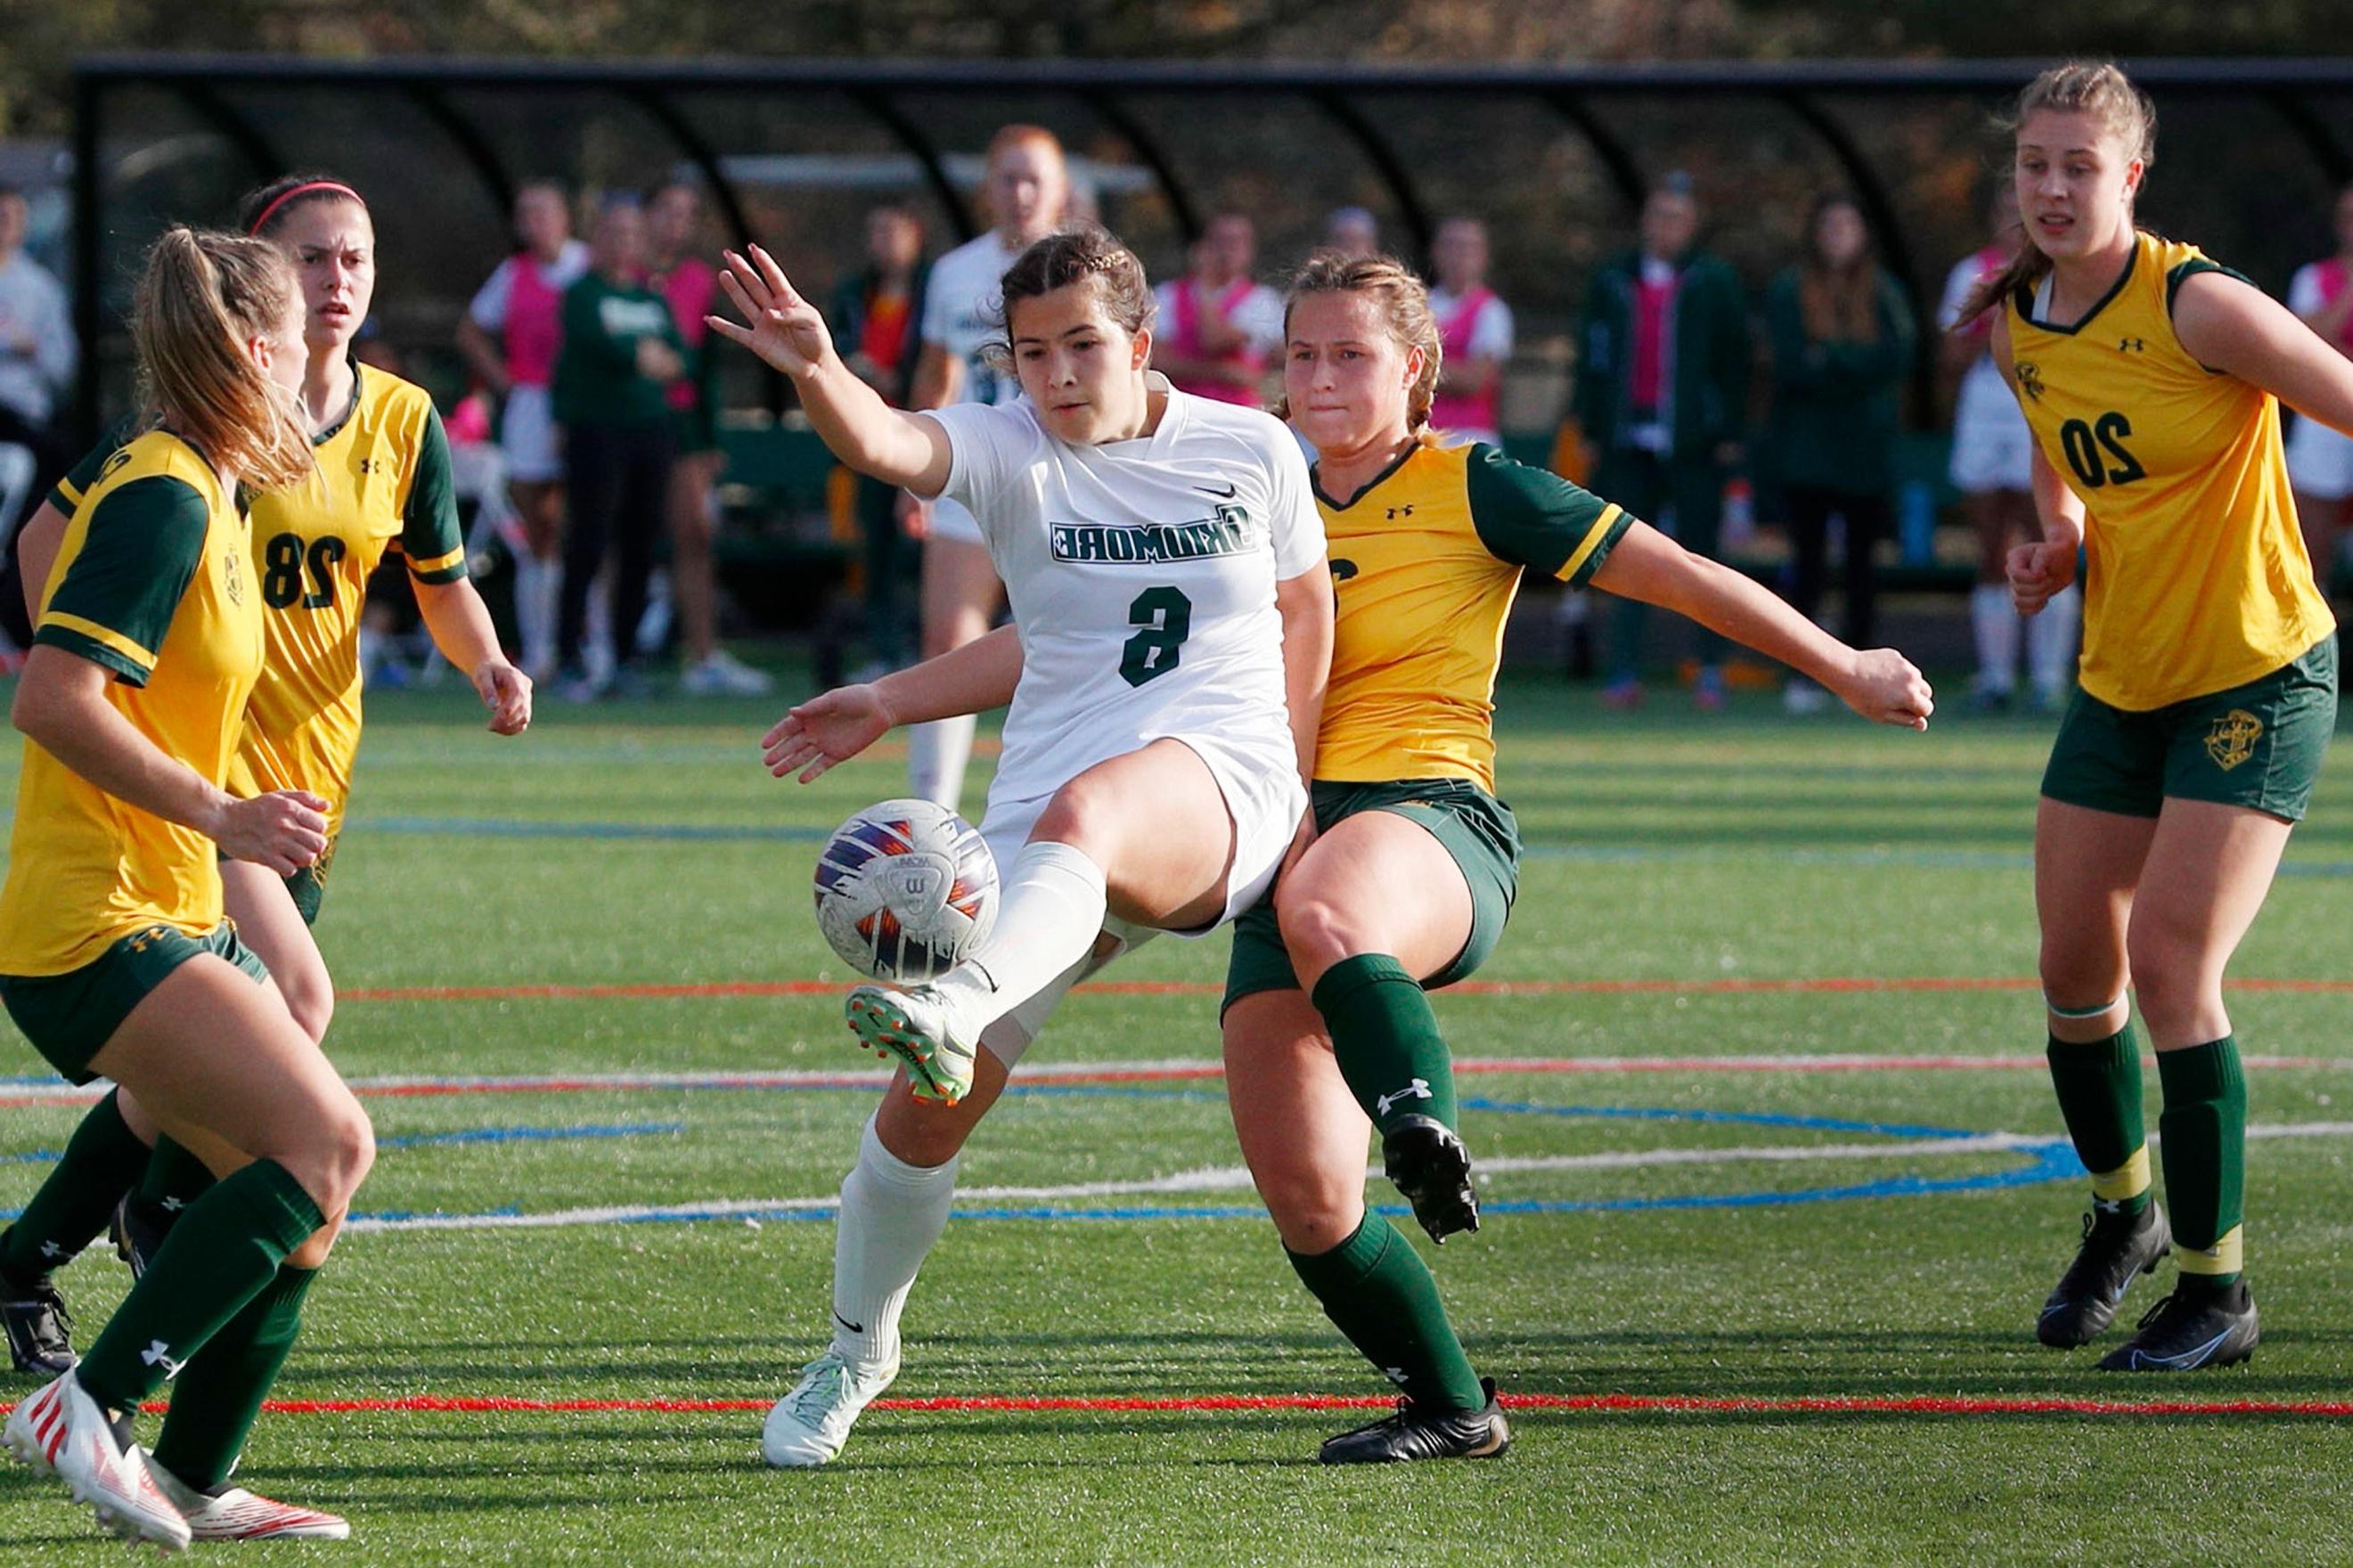 Kat Dunn ’24 rapidly transformed herself from a “super-sub” hoping for game time to Skidmore